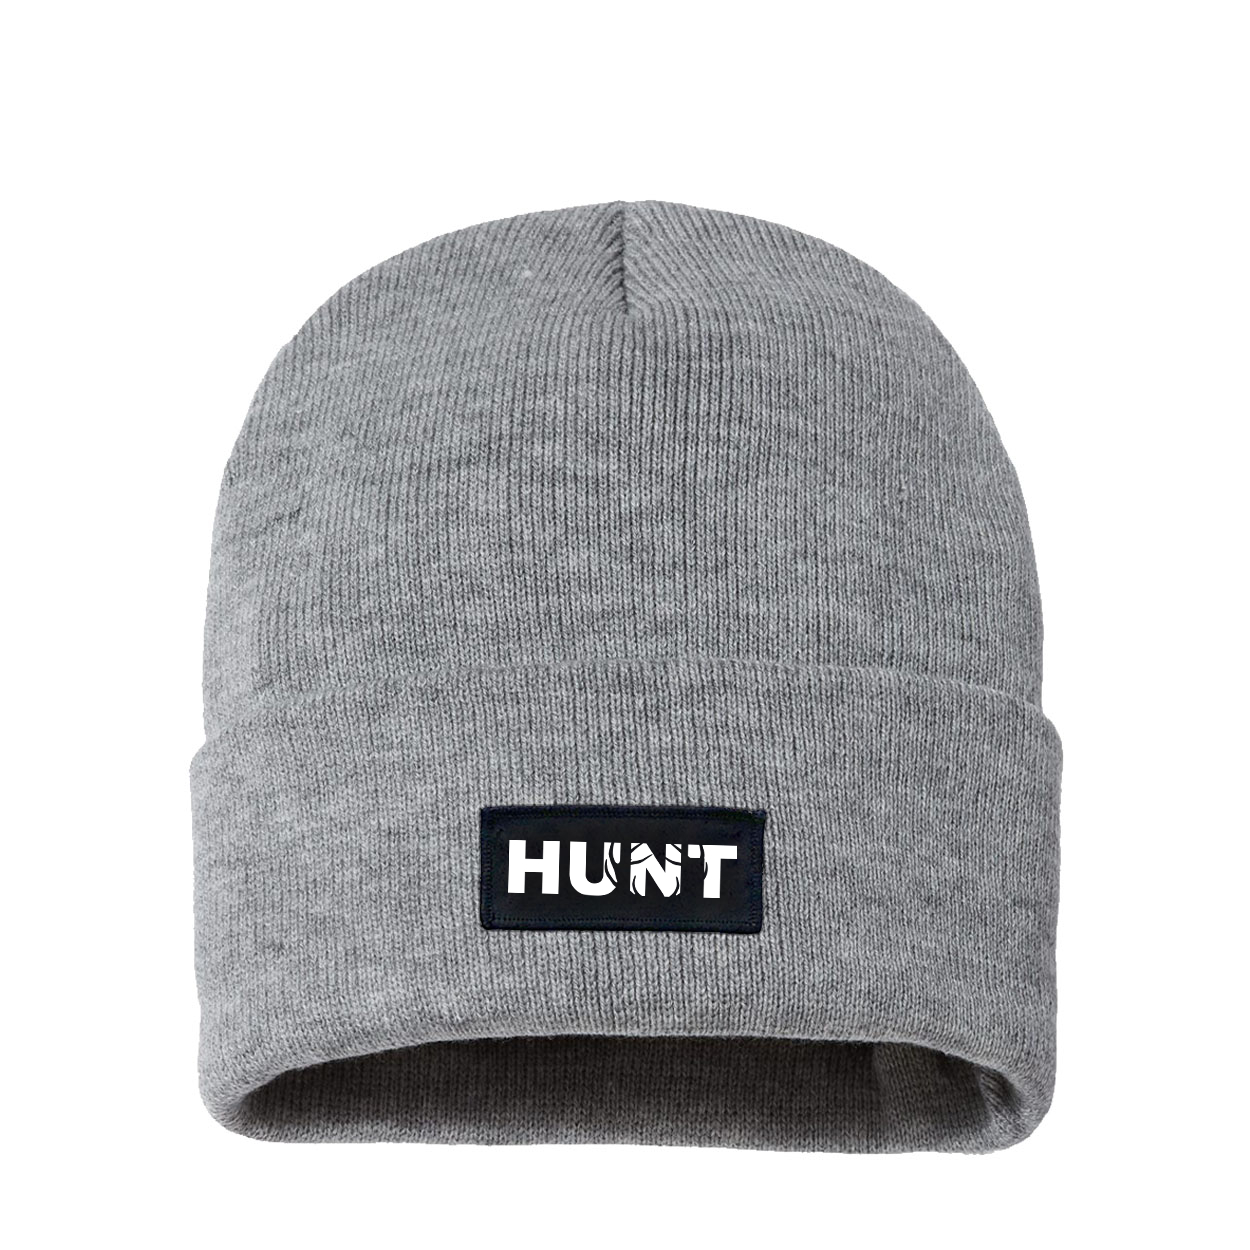 Hunt Rack Logo Night Out Woven Patch Sherpa Lined Cuffed Beanie Heather Gray (White Logo)